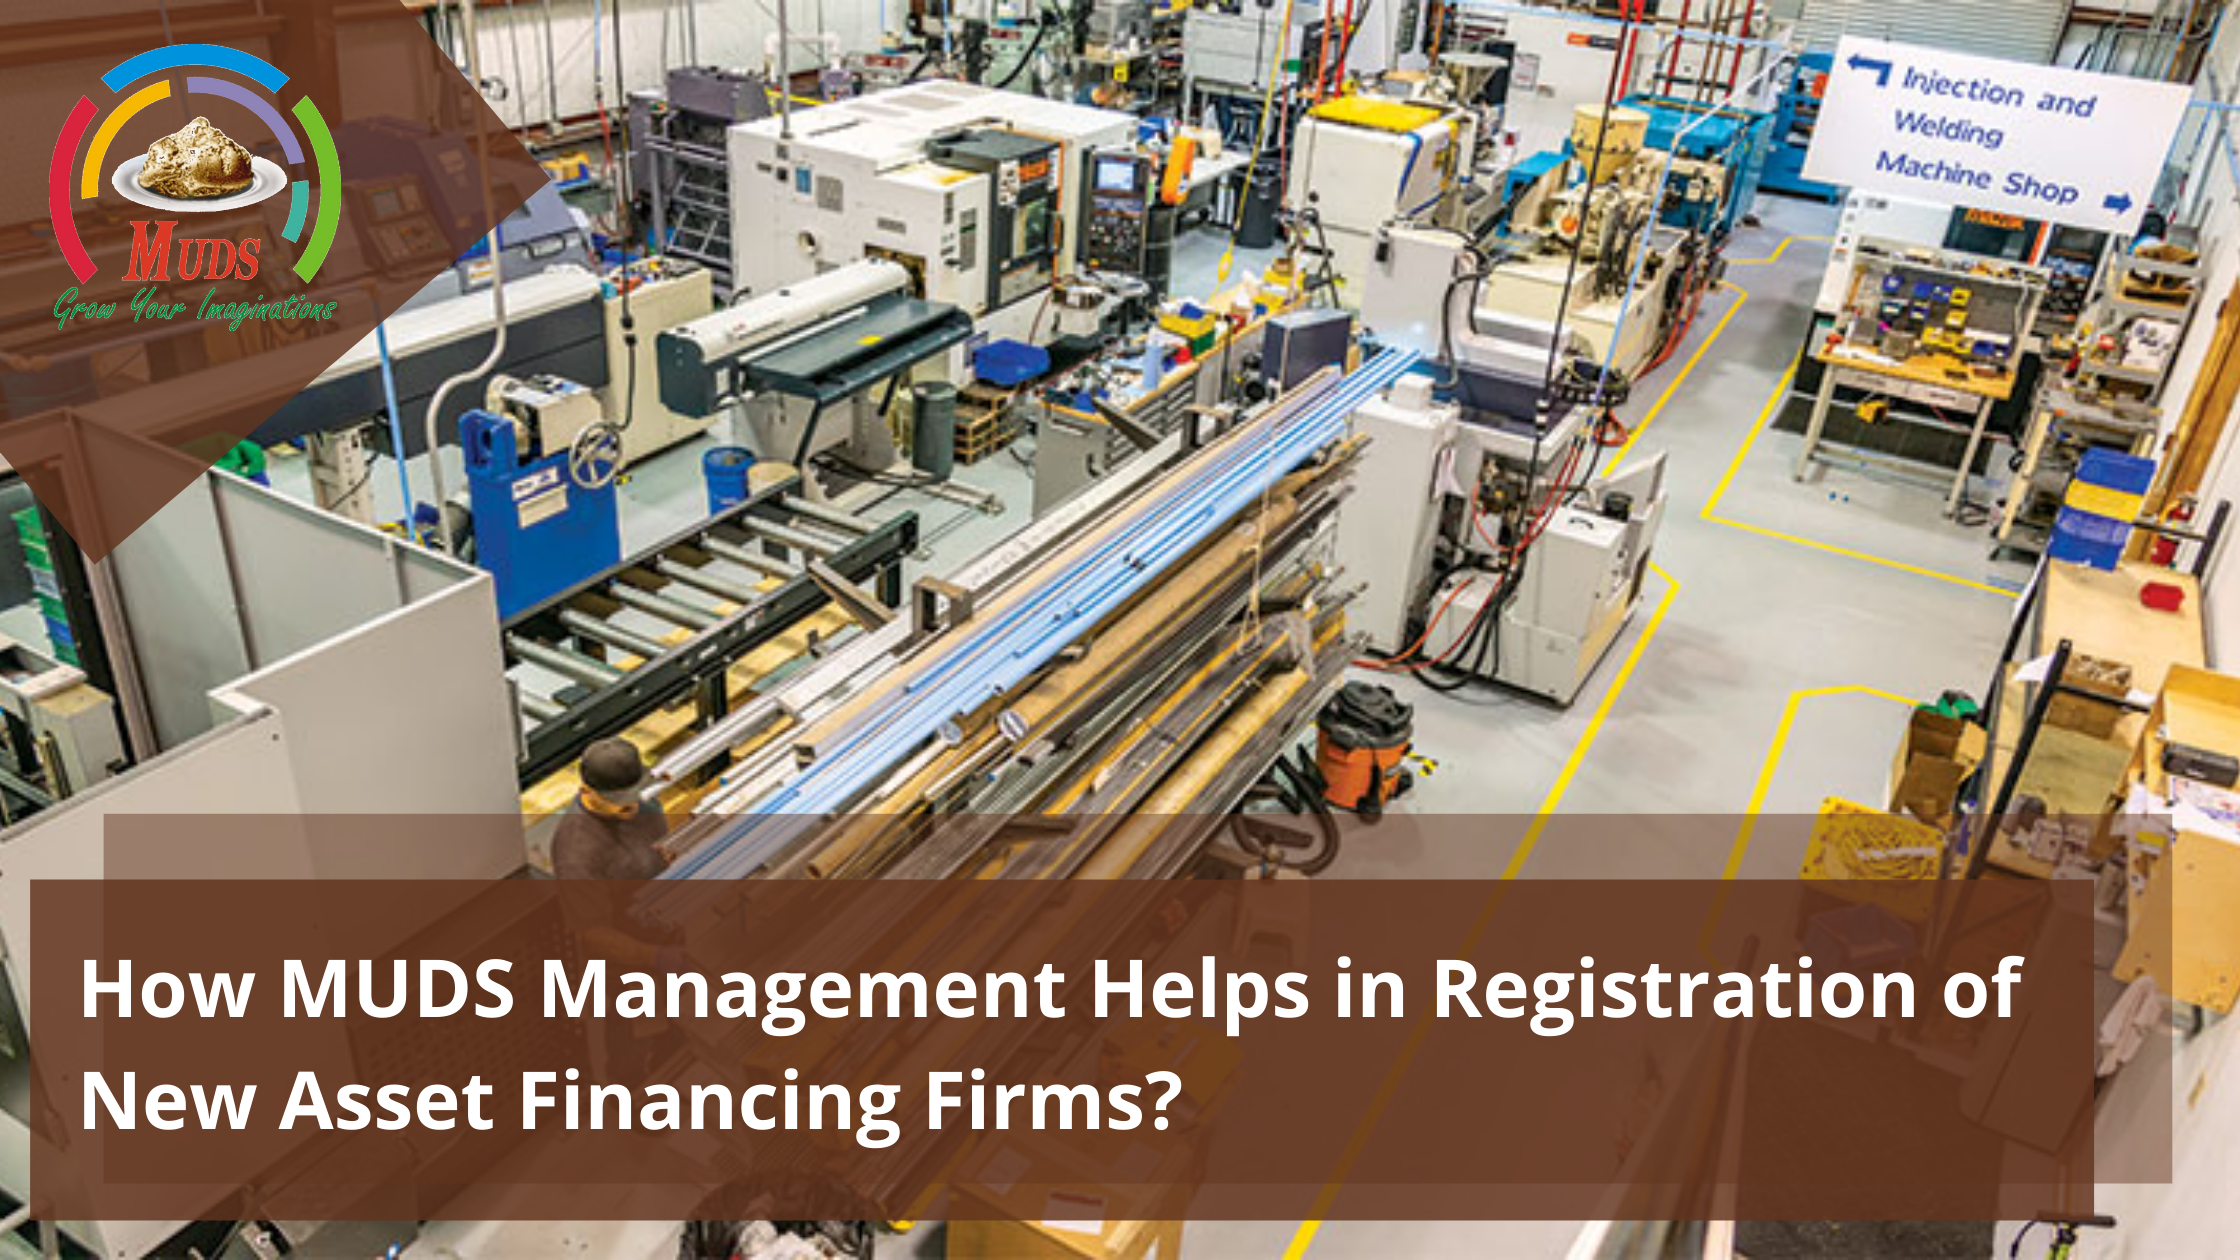 How MUDS Management Helps in Registration of New Asset Financing Firms?